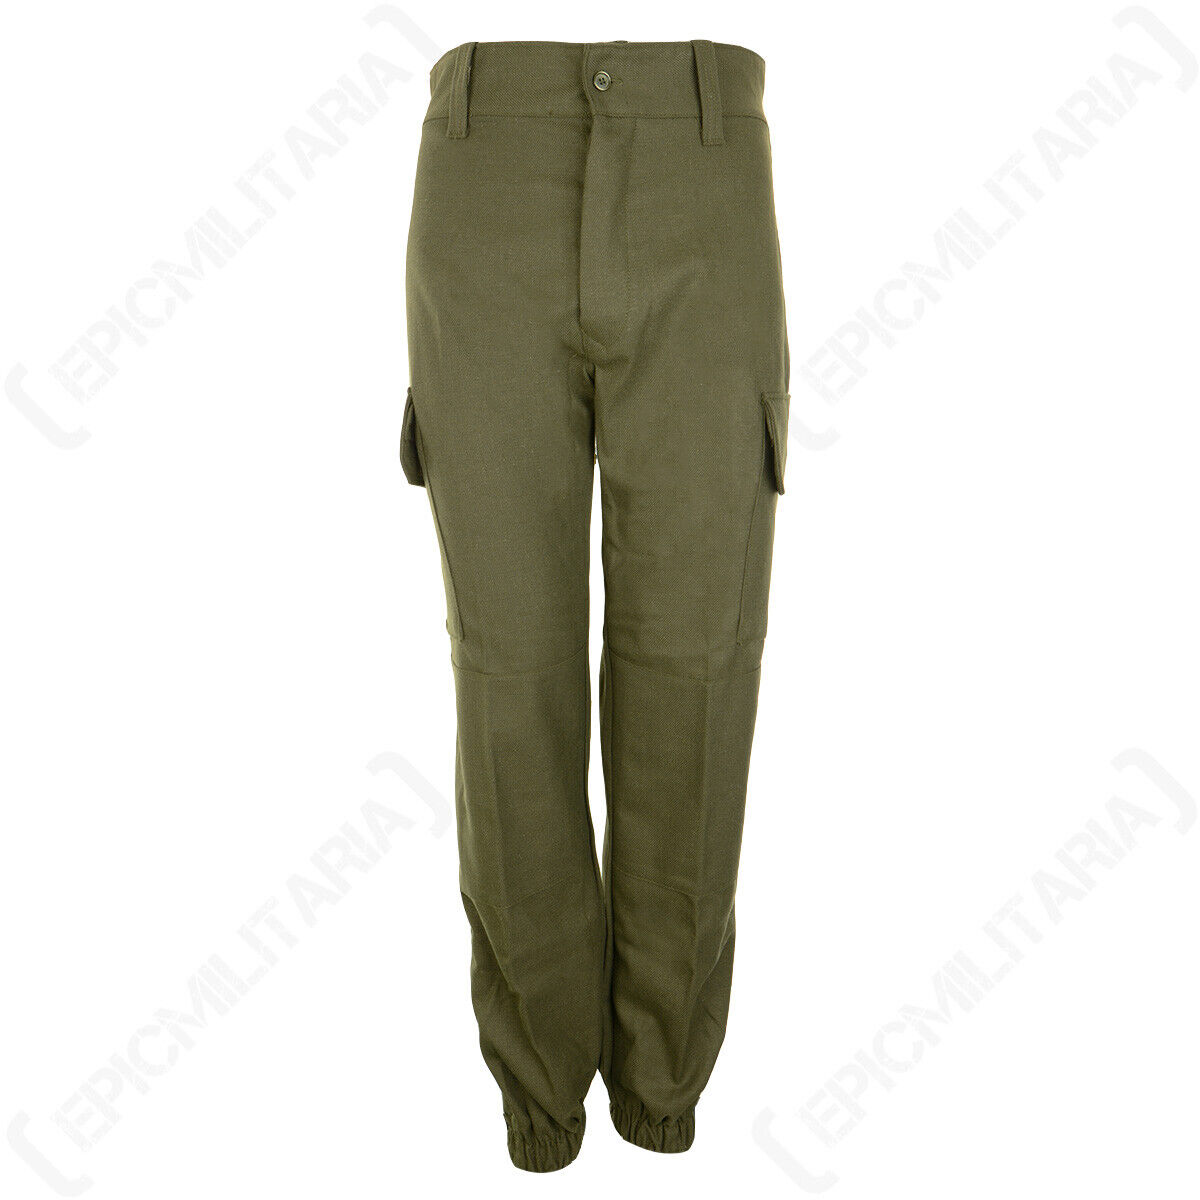 Original Spanish Army Issued Field Trousers - Military Army Surplus - All Sizes